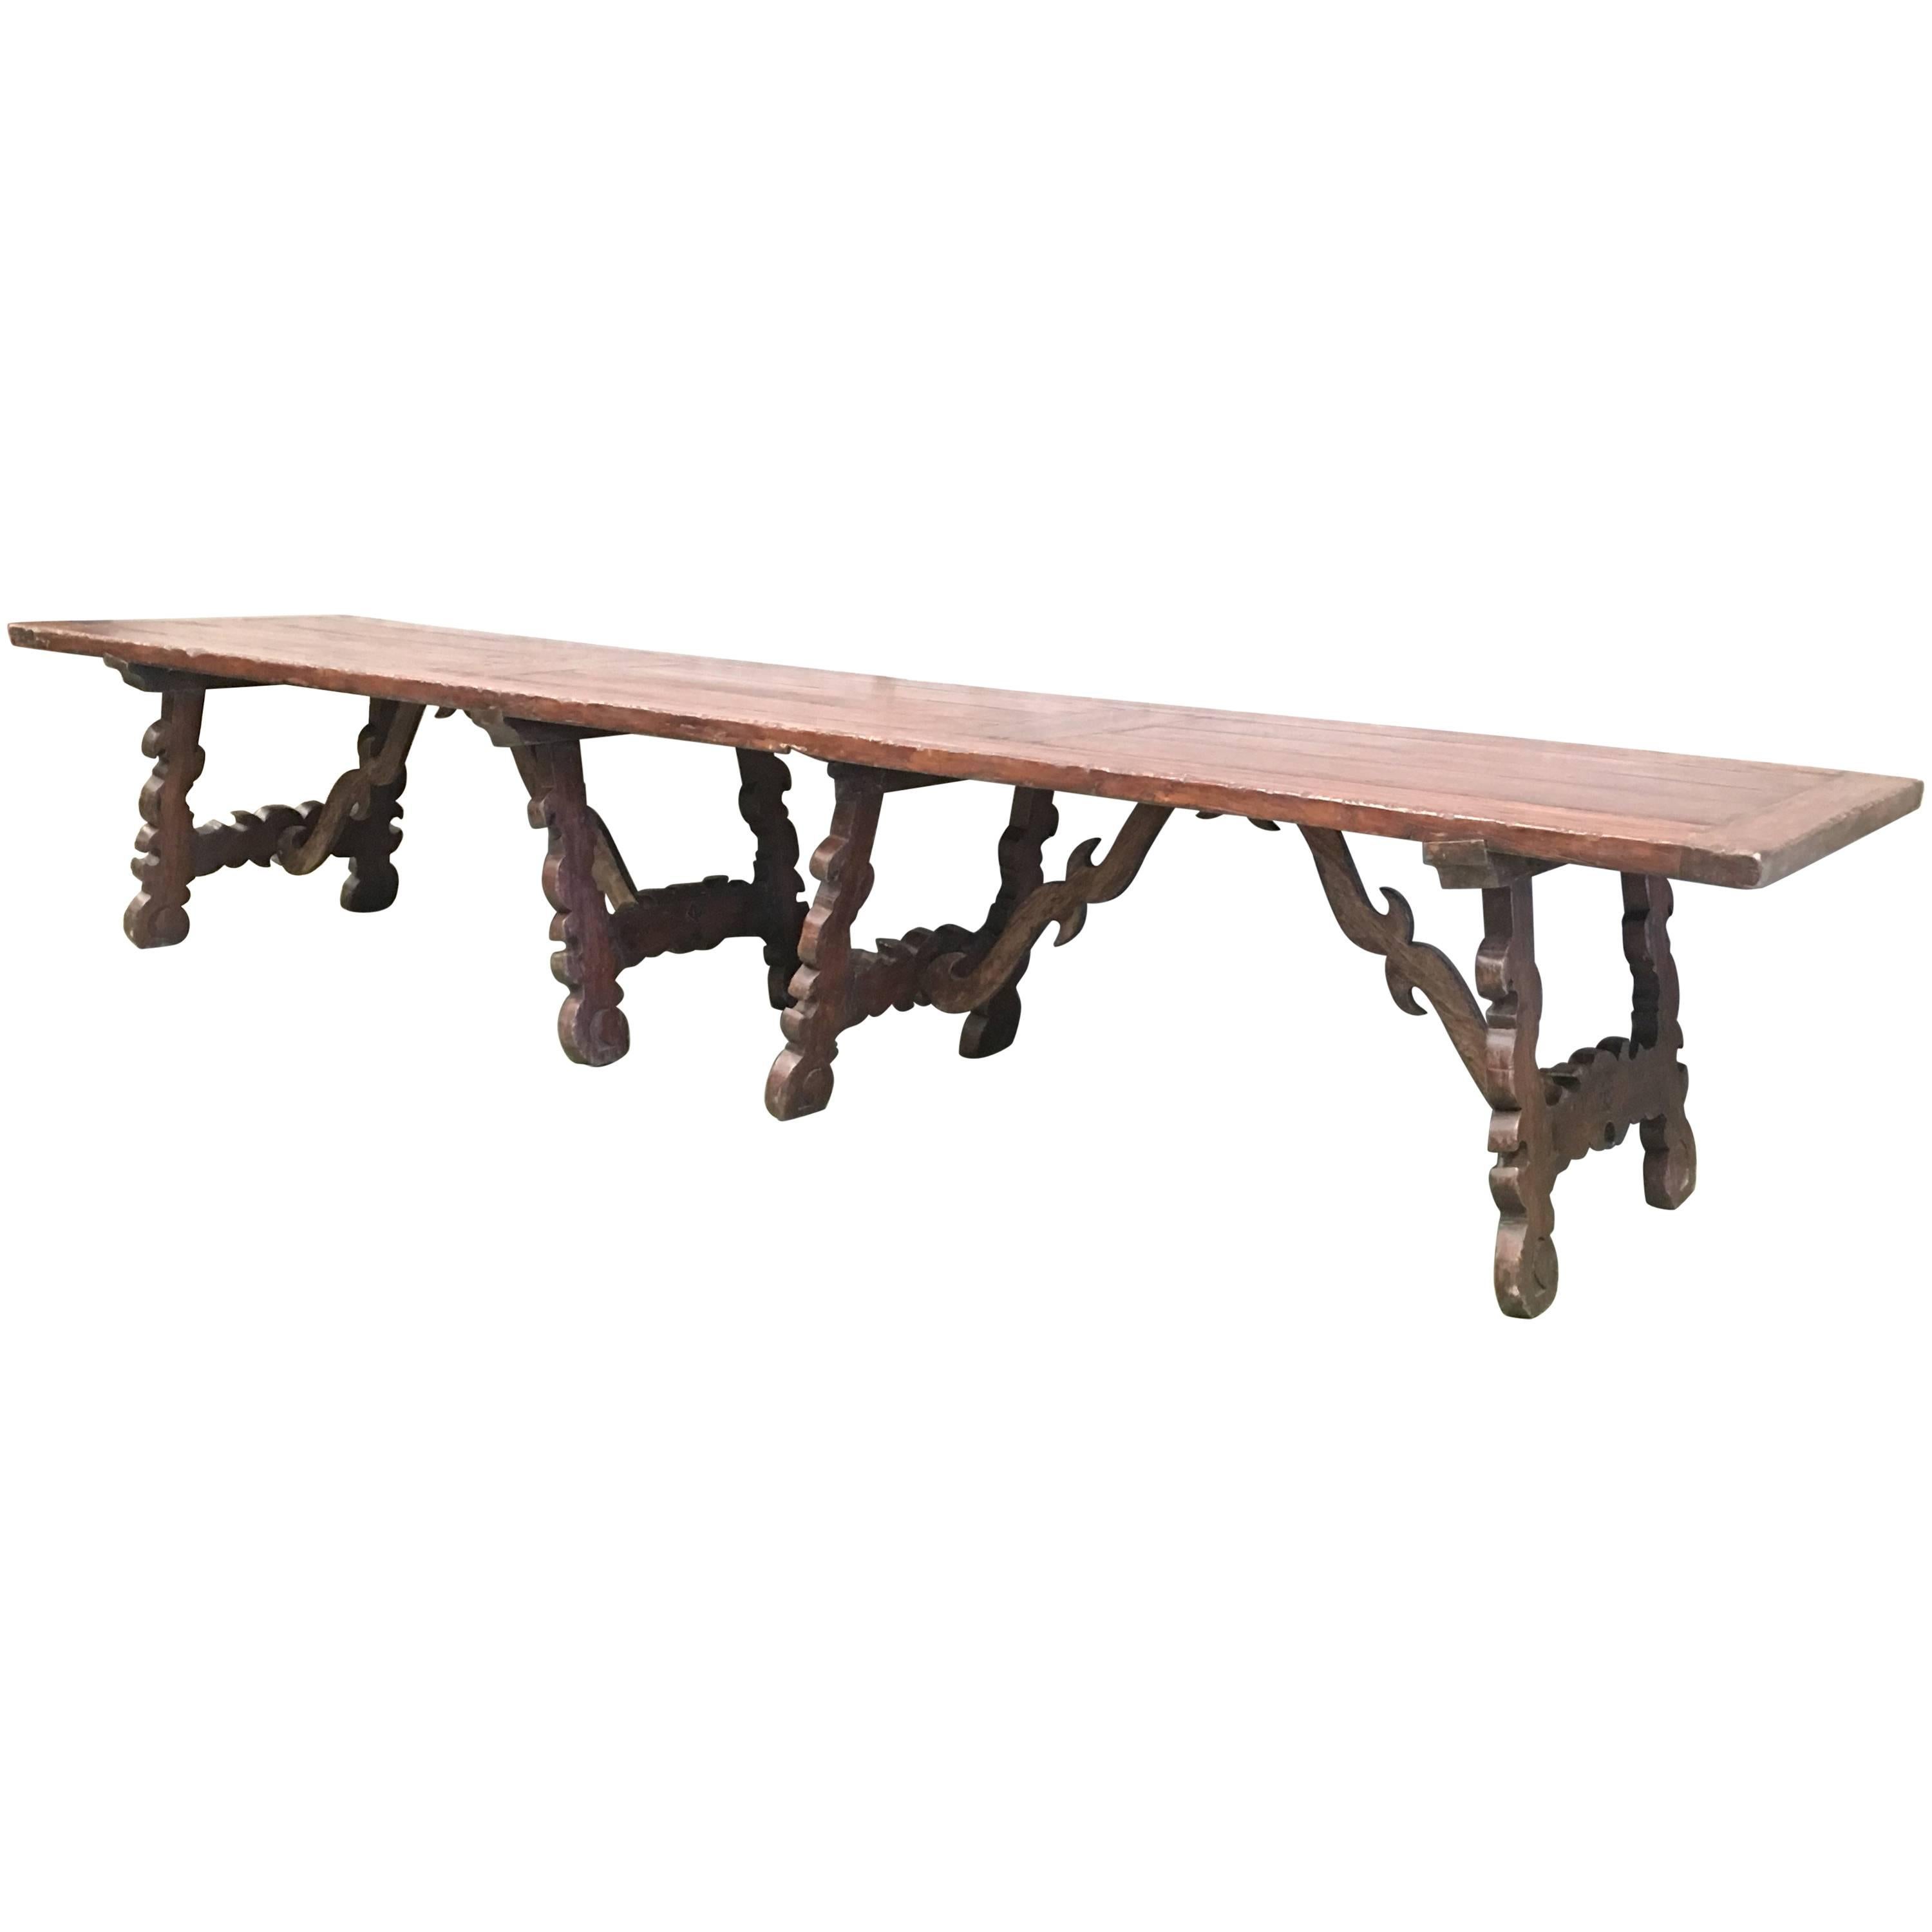 Early 19th Century French Baroque Style Walnut Trestle Dining Farm Table 163´